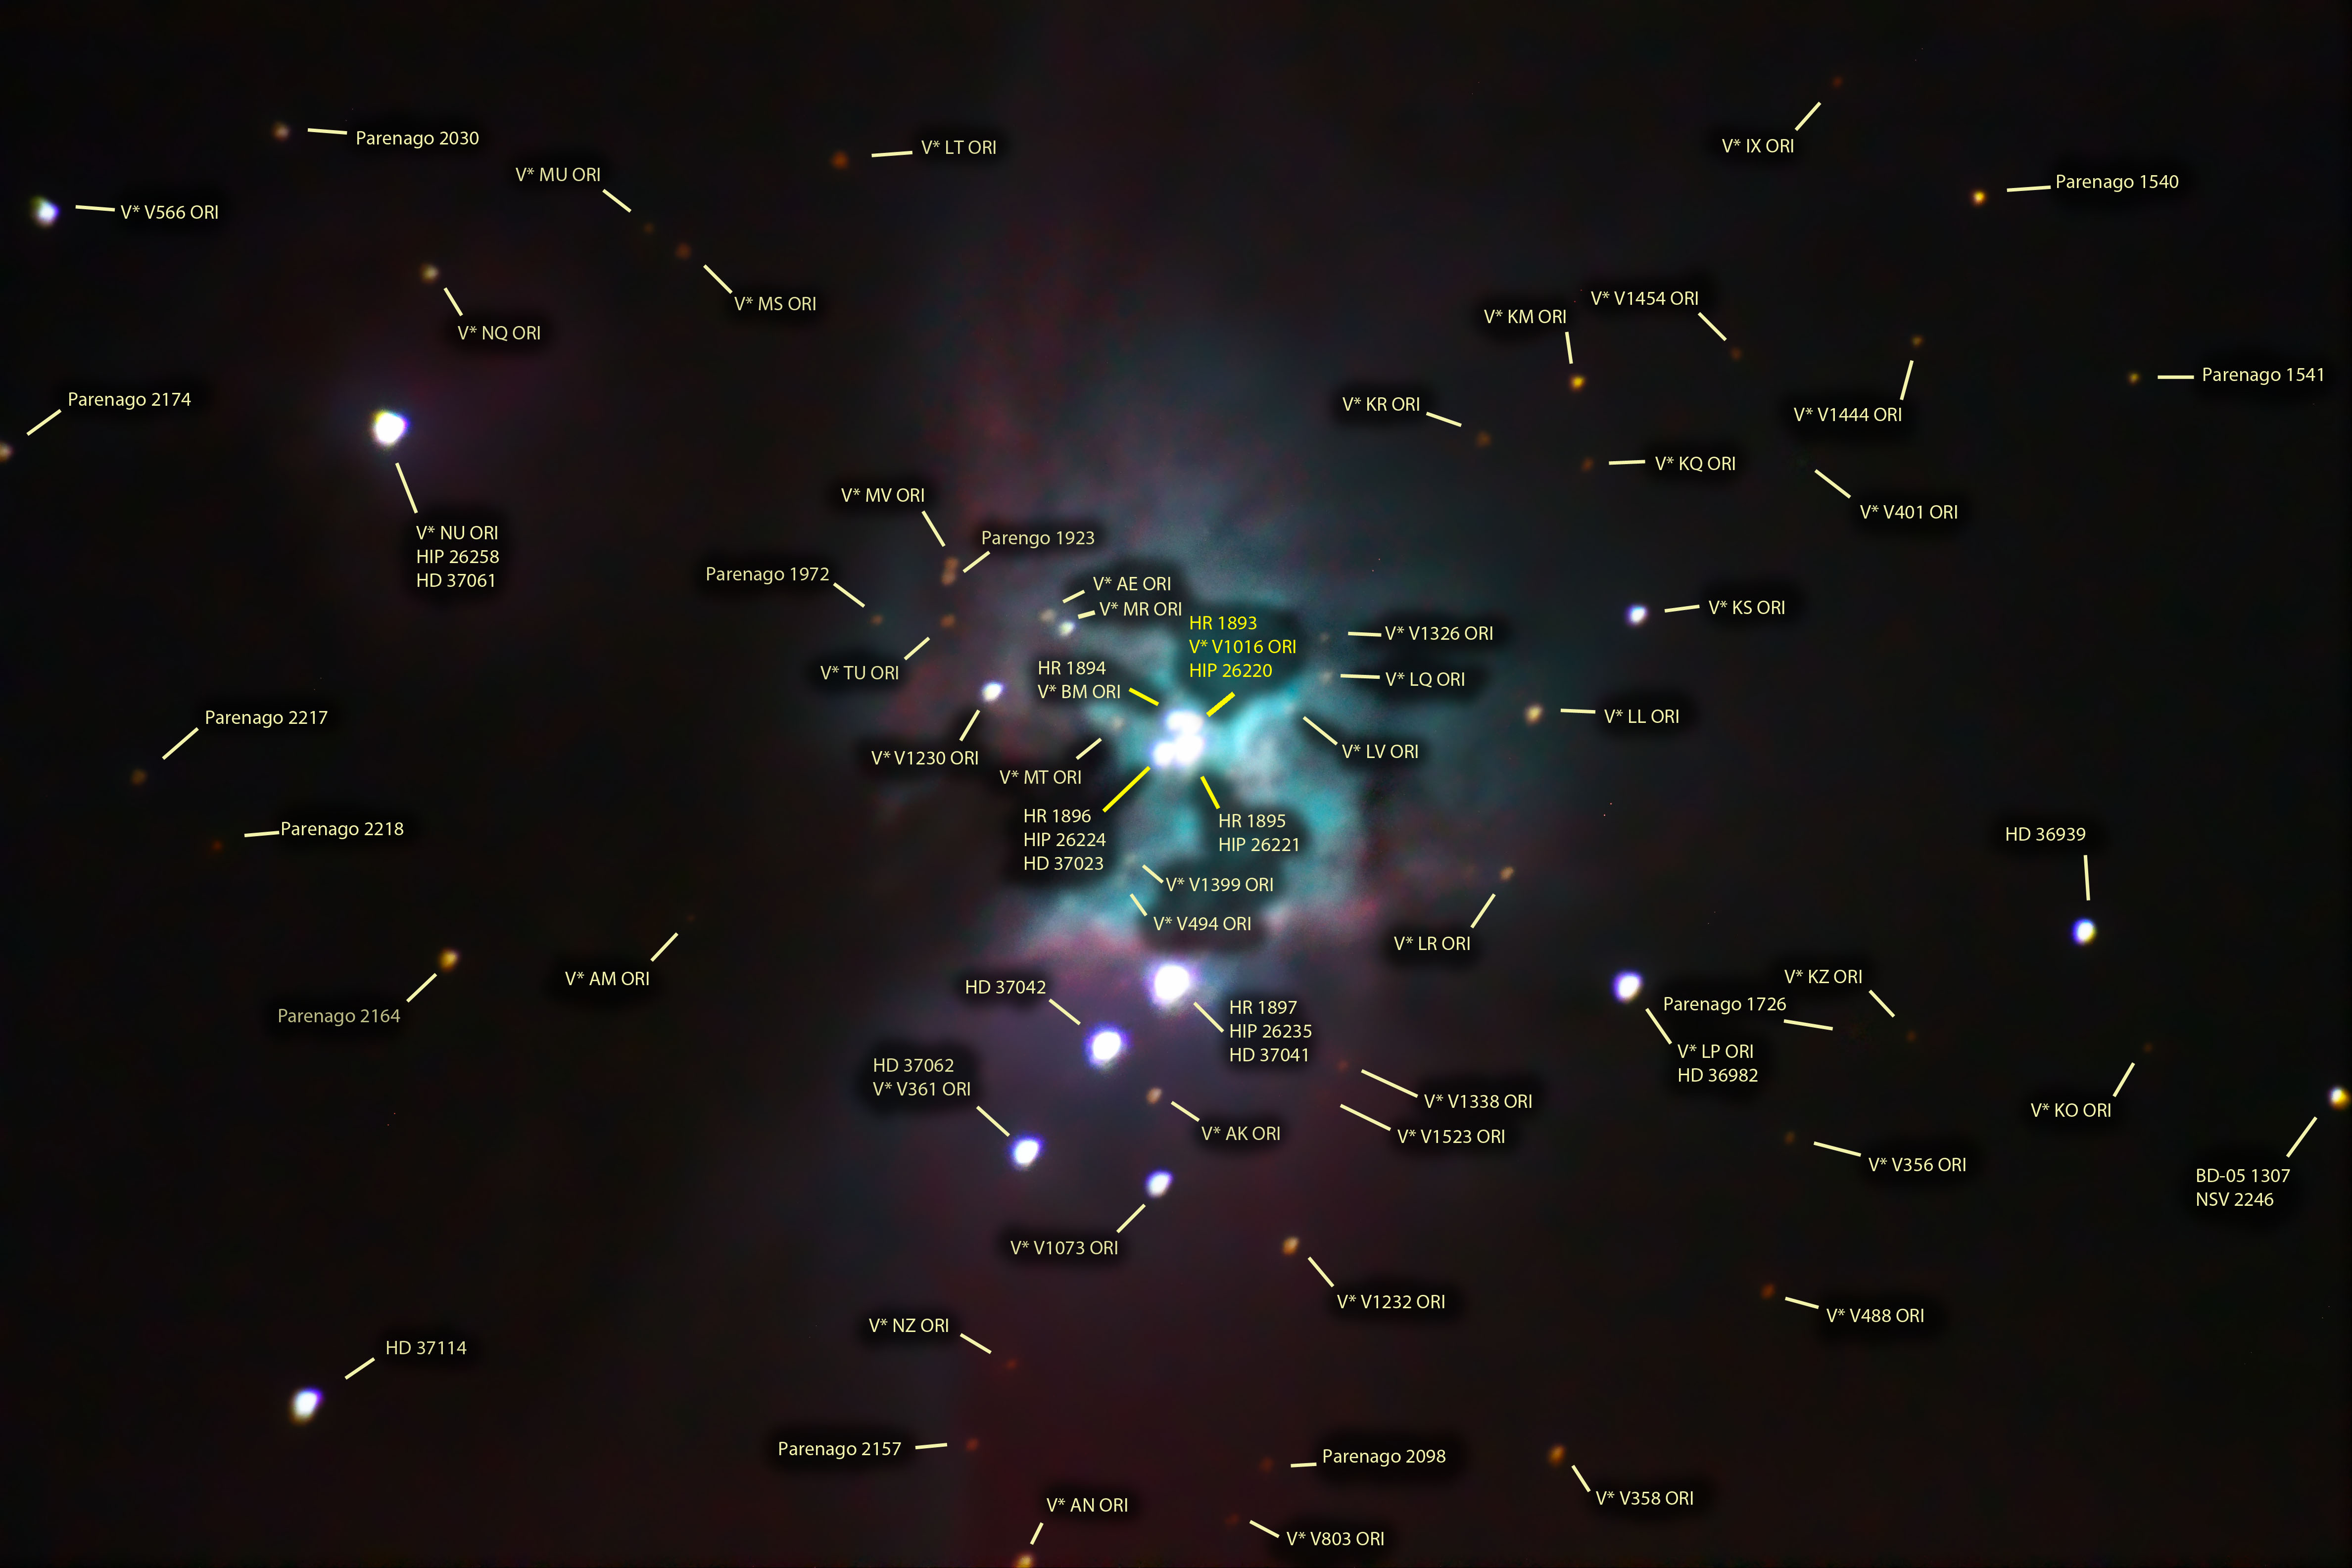 Extended annotated image of The Great Nebula in Orion